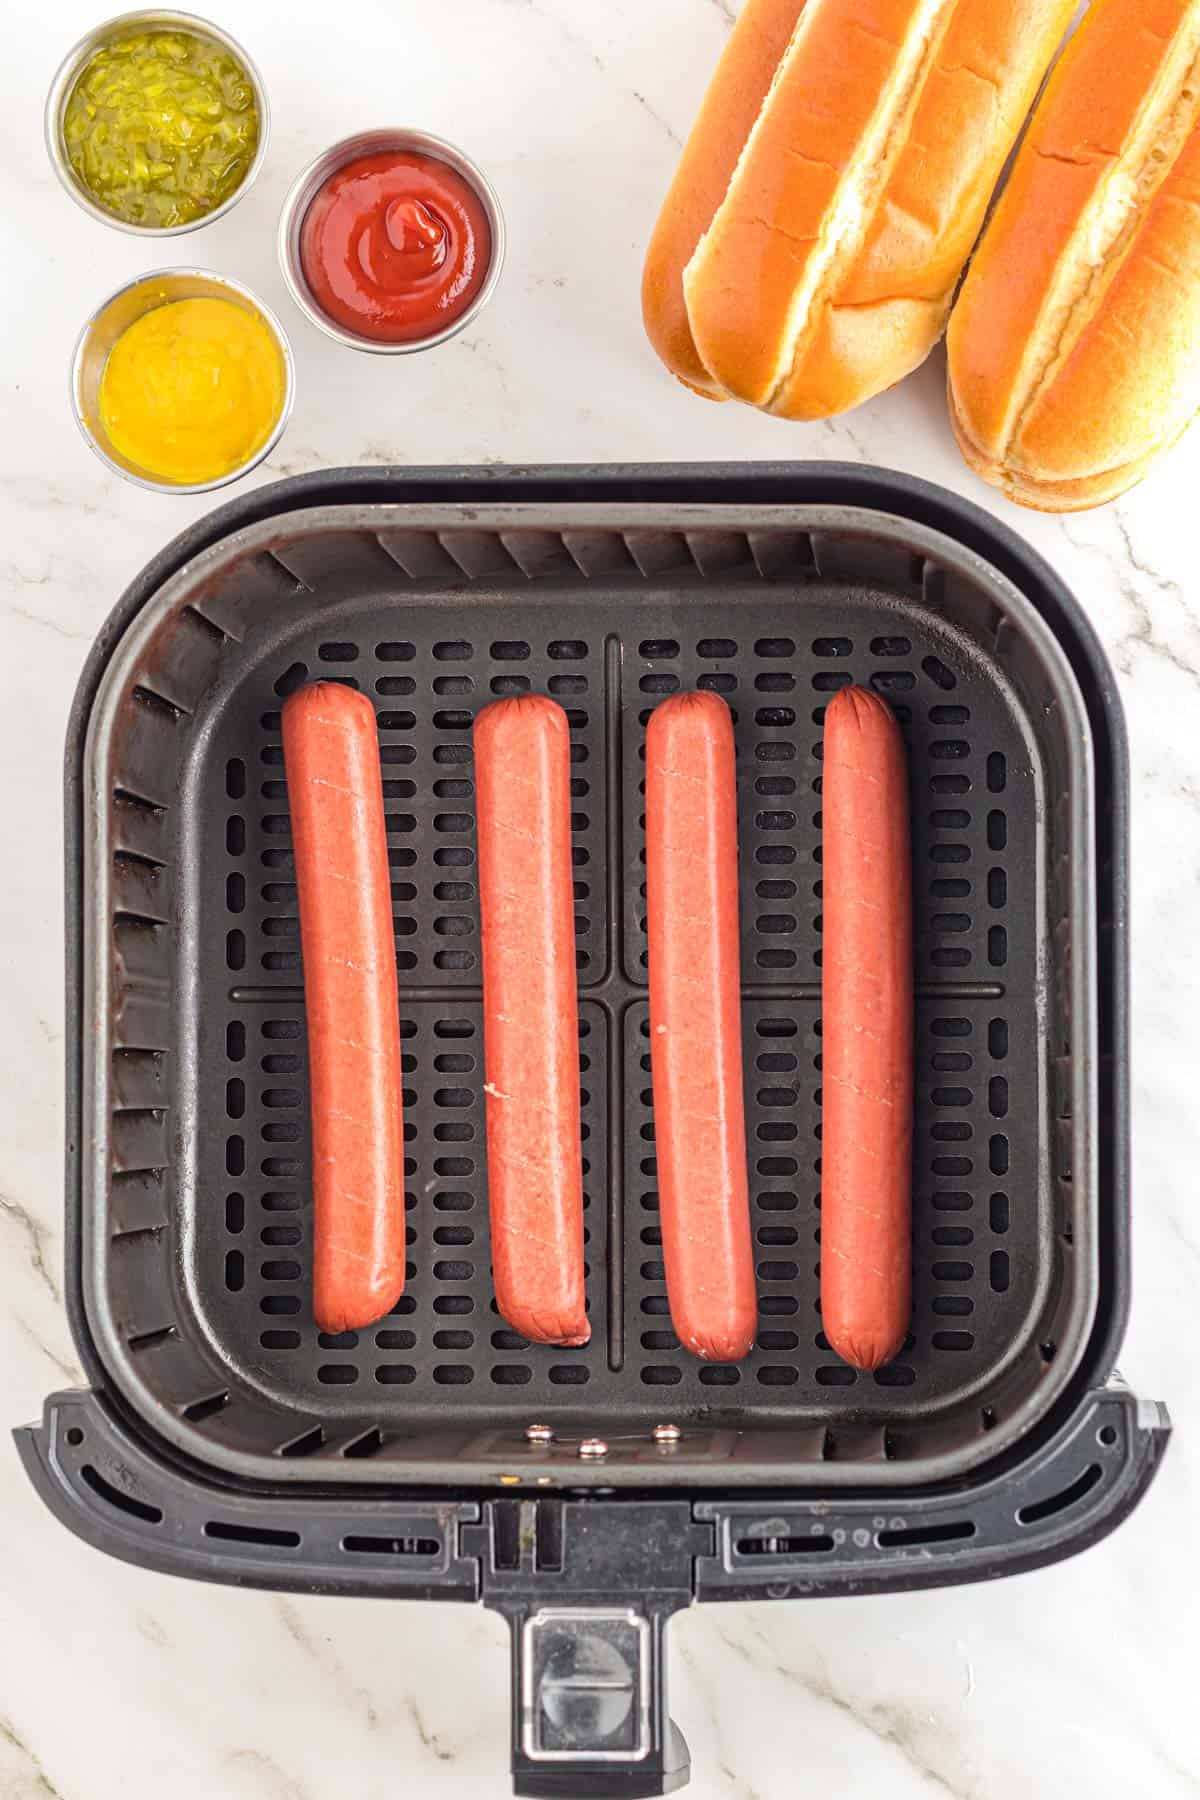 wieners placed in the air fryer basket before cooking